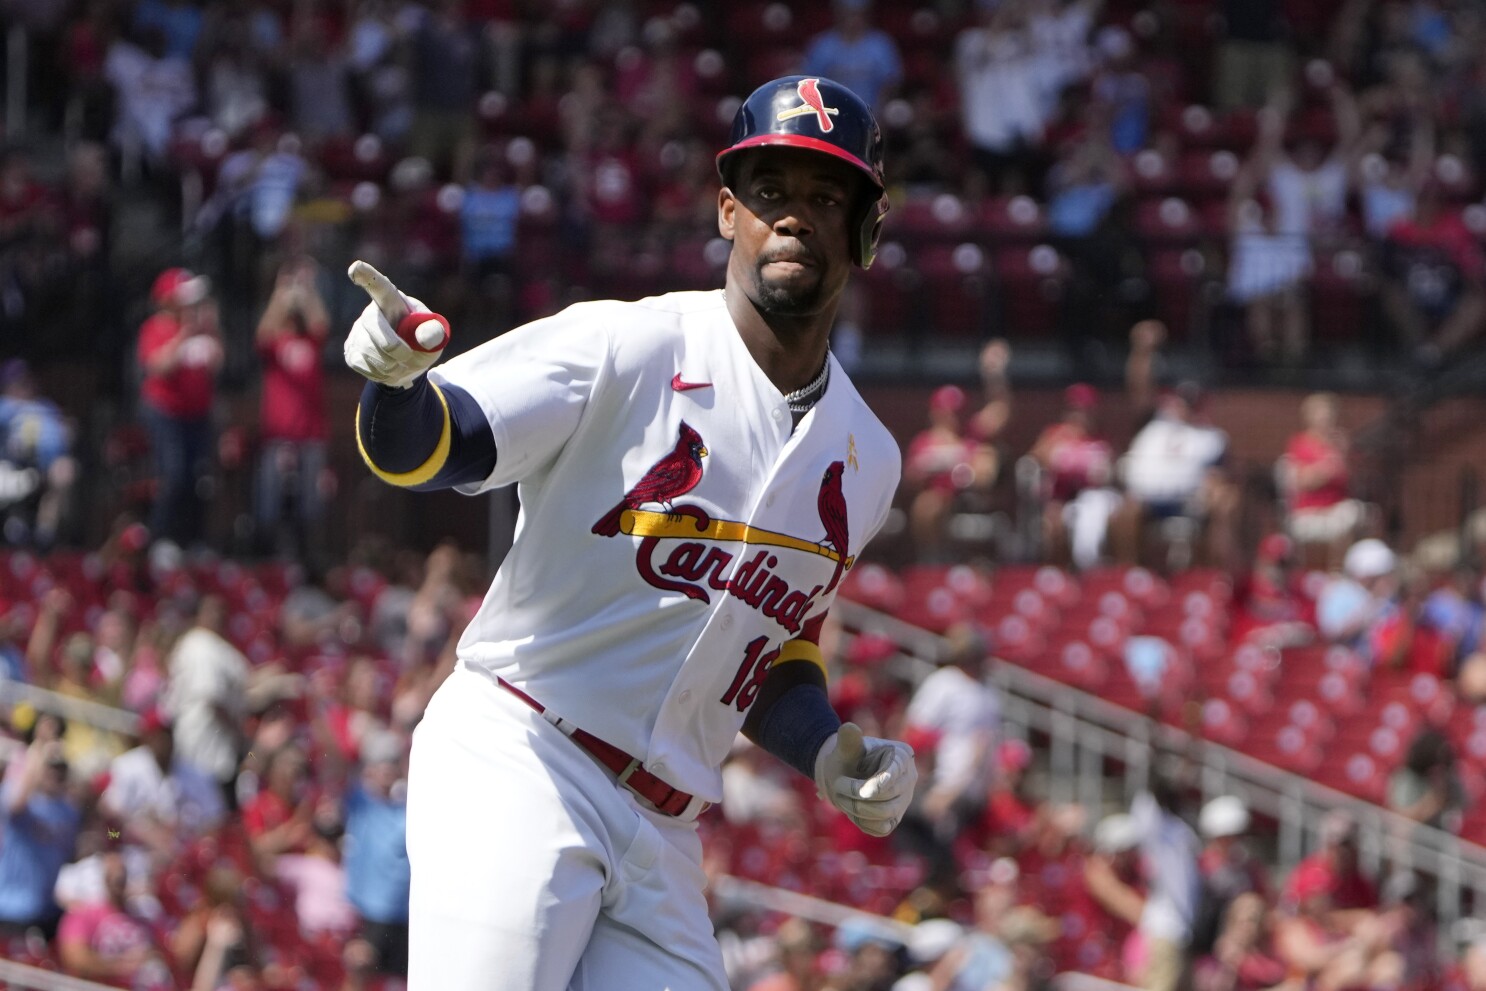 Walker and Thompson help the Cardinals knock off the Pirates 6-4